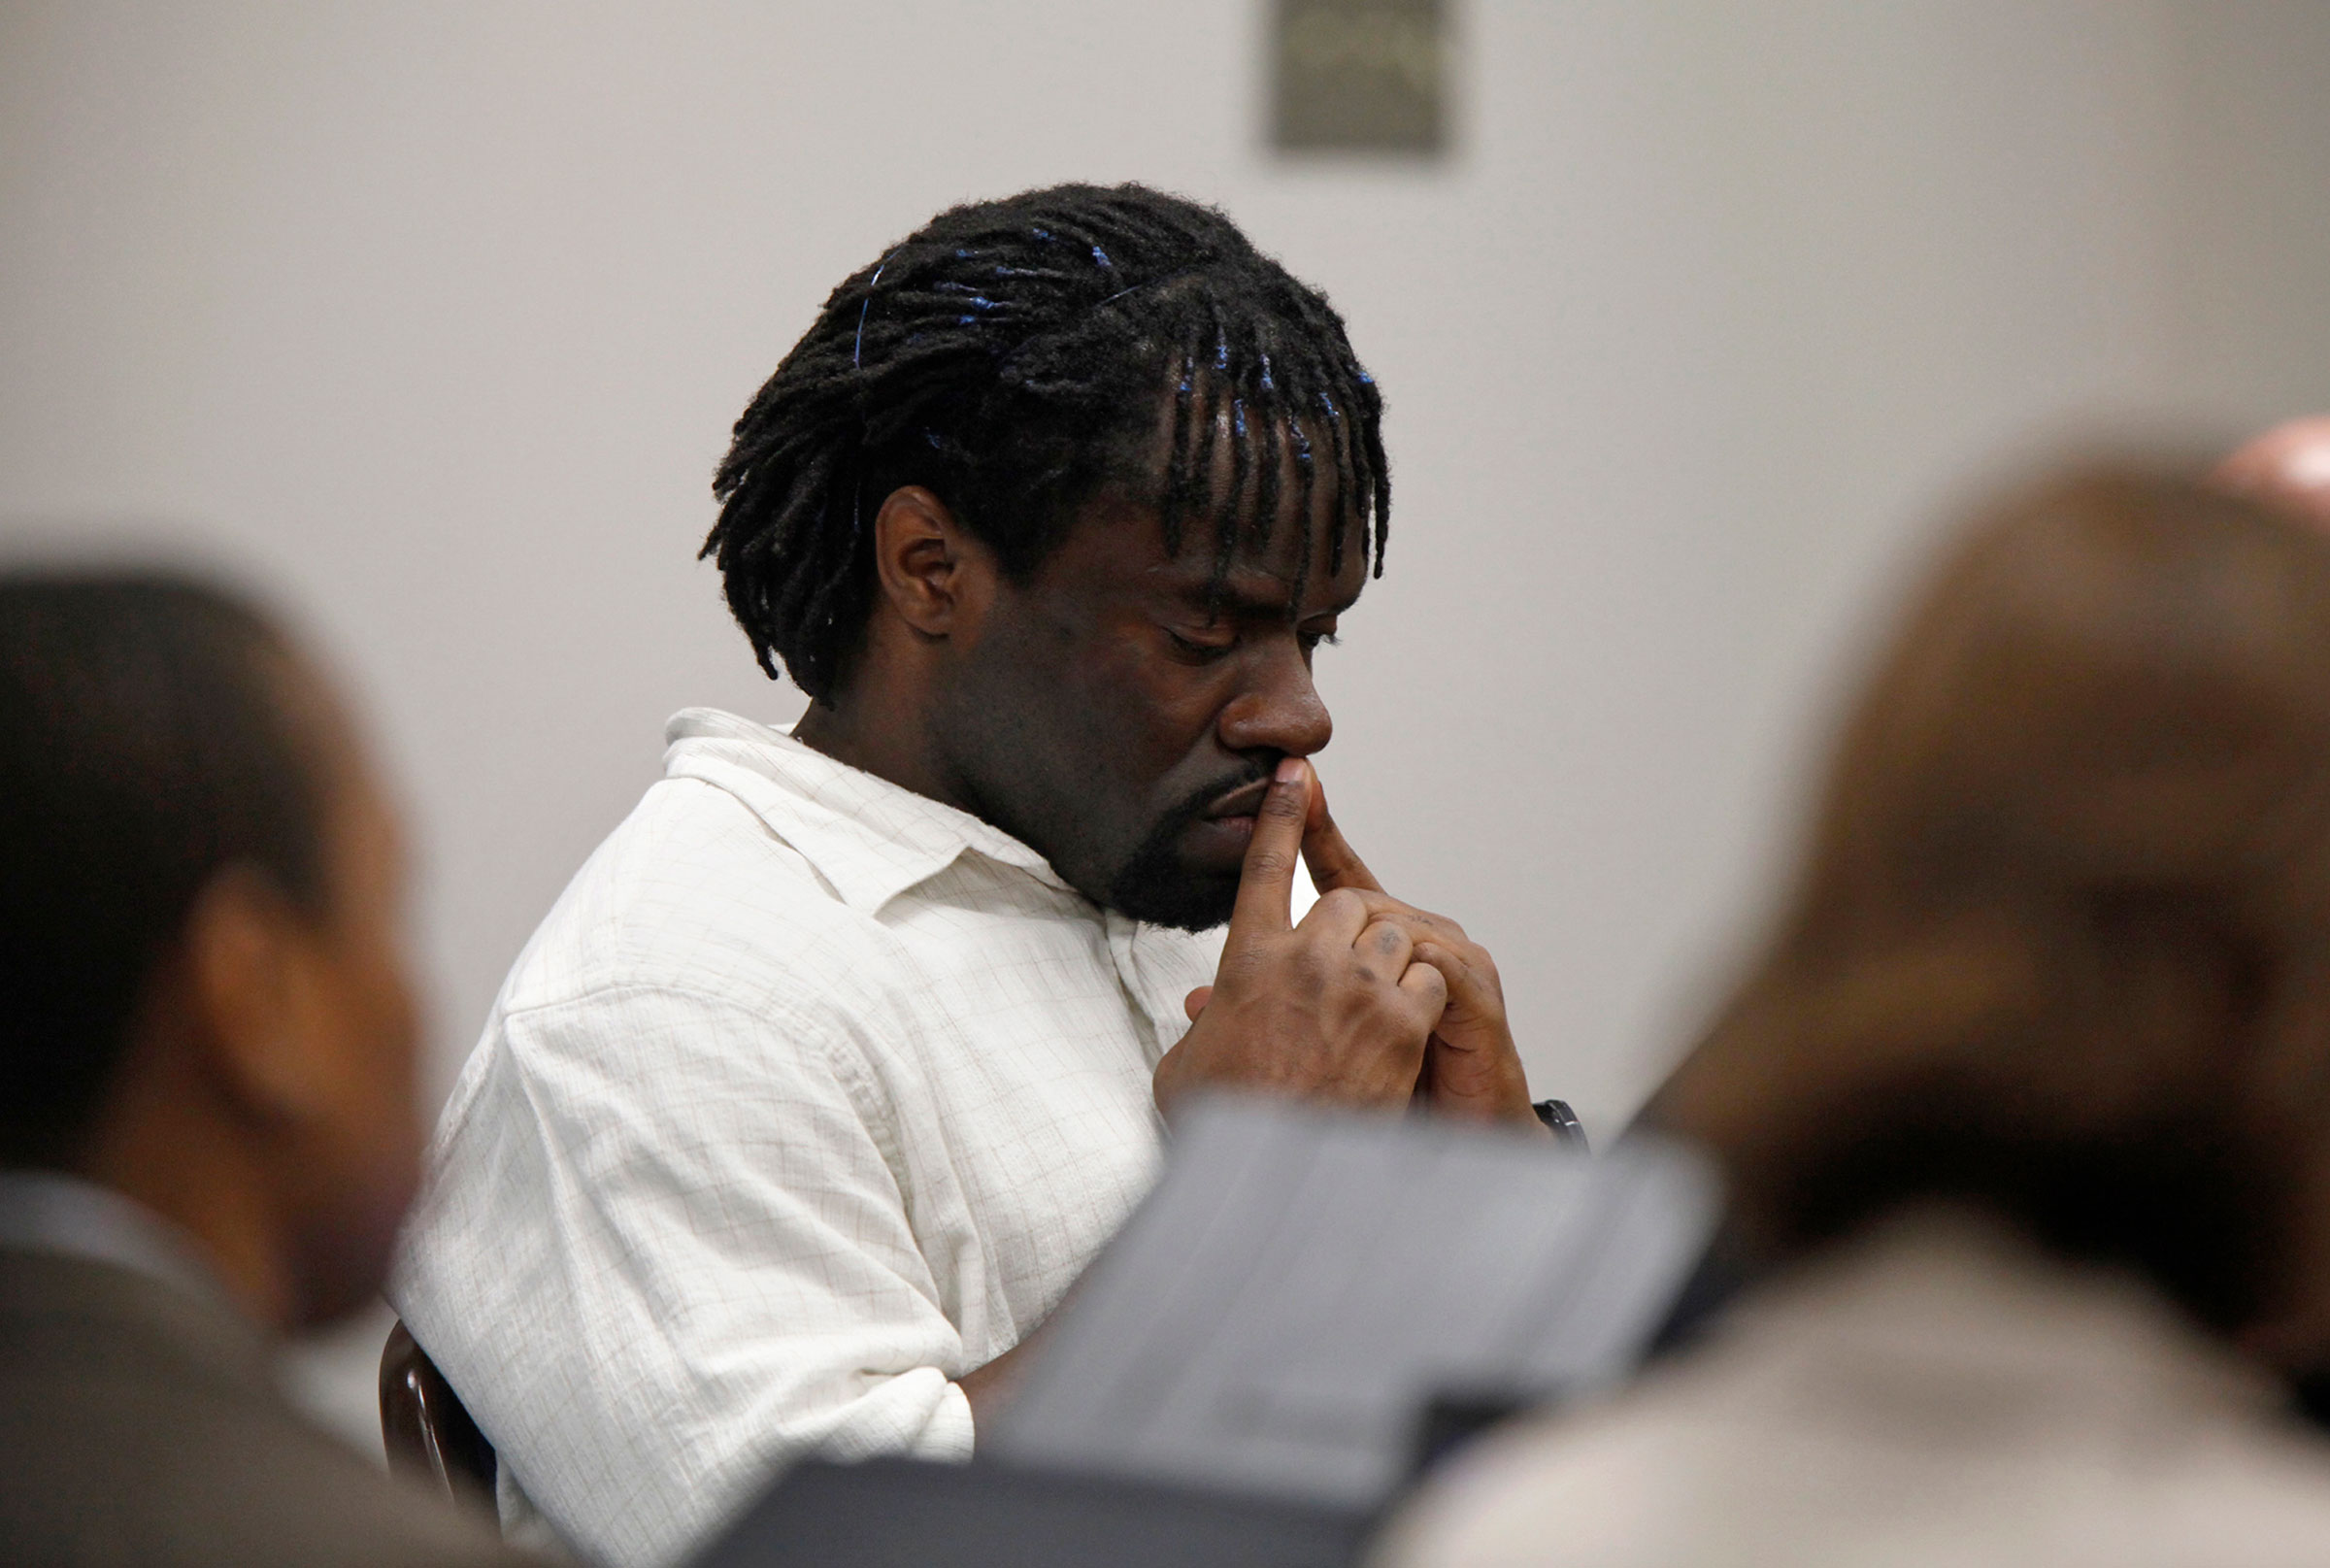 Death row inmate Marcus Robinson listens as Cumberland County Senior Resident Superior Court Judge Greg Weeks found that racial bias played a role in his trial and sentencing on April 20, 2012, in Fayetteville, N.C. (Shawn Rocco—Raleigh News and Observer/Tribune News Service/Getty Images)